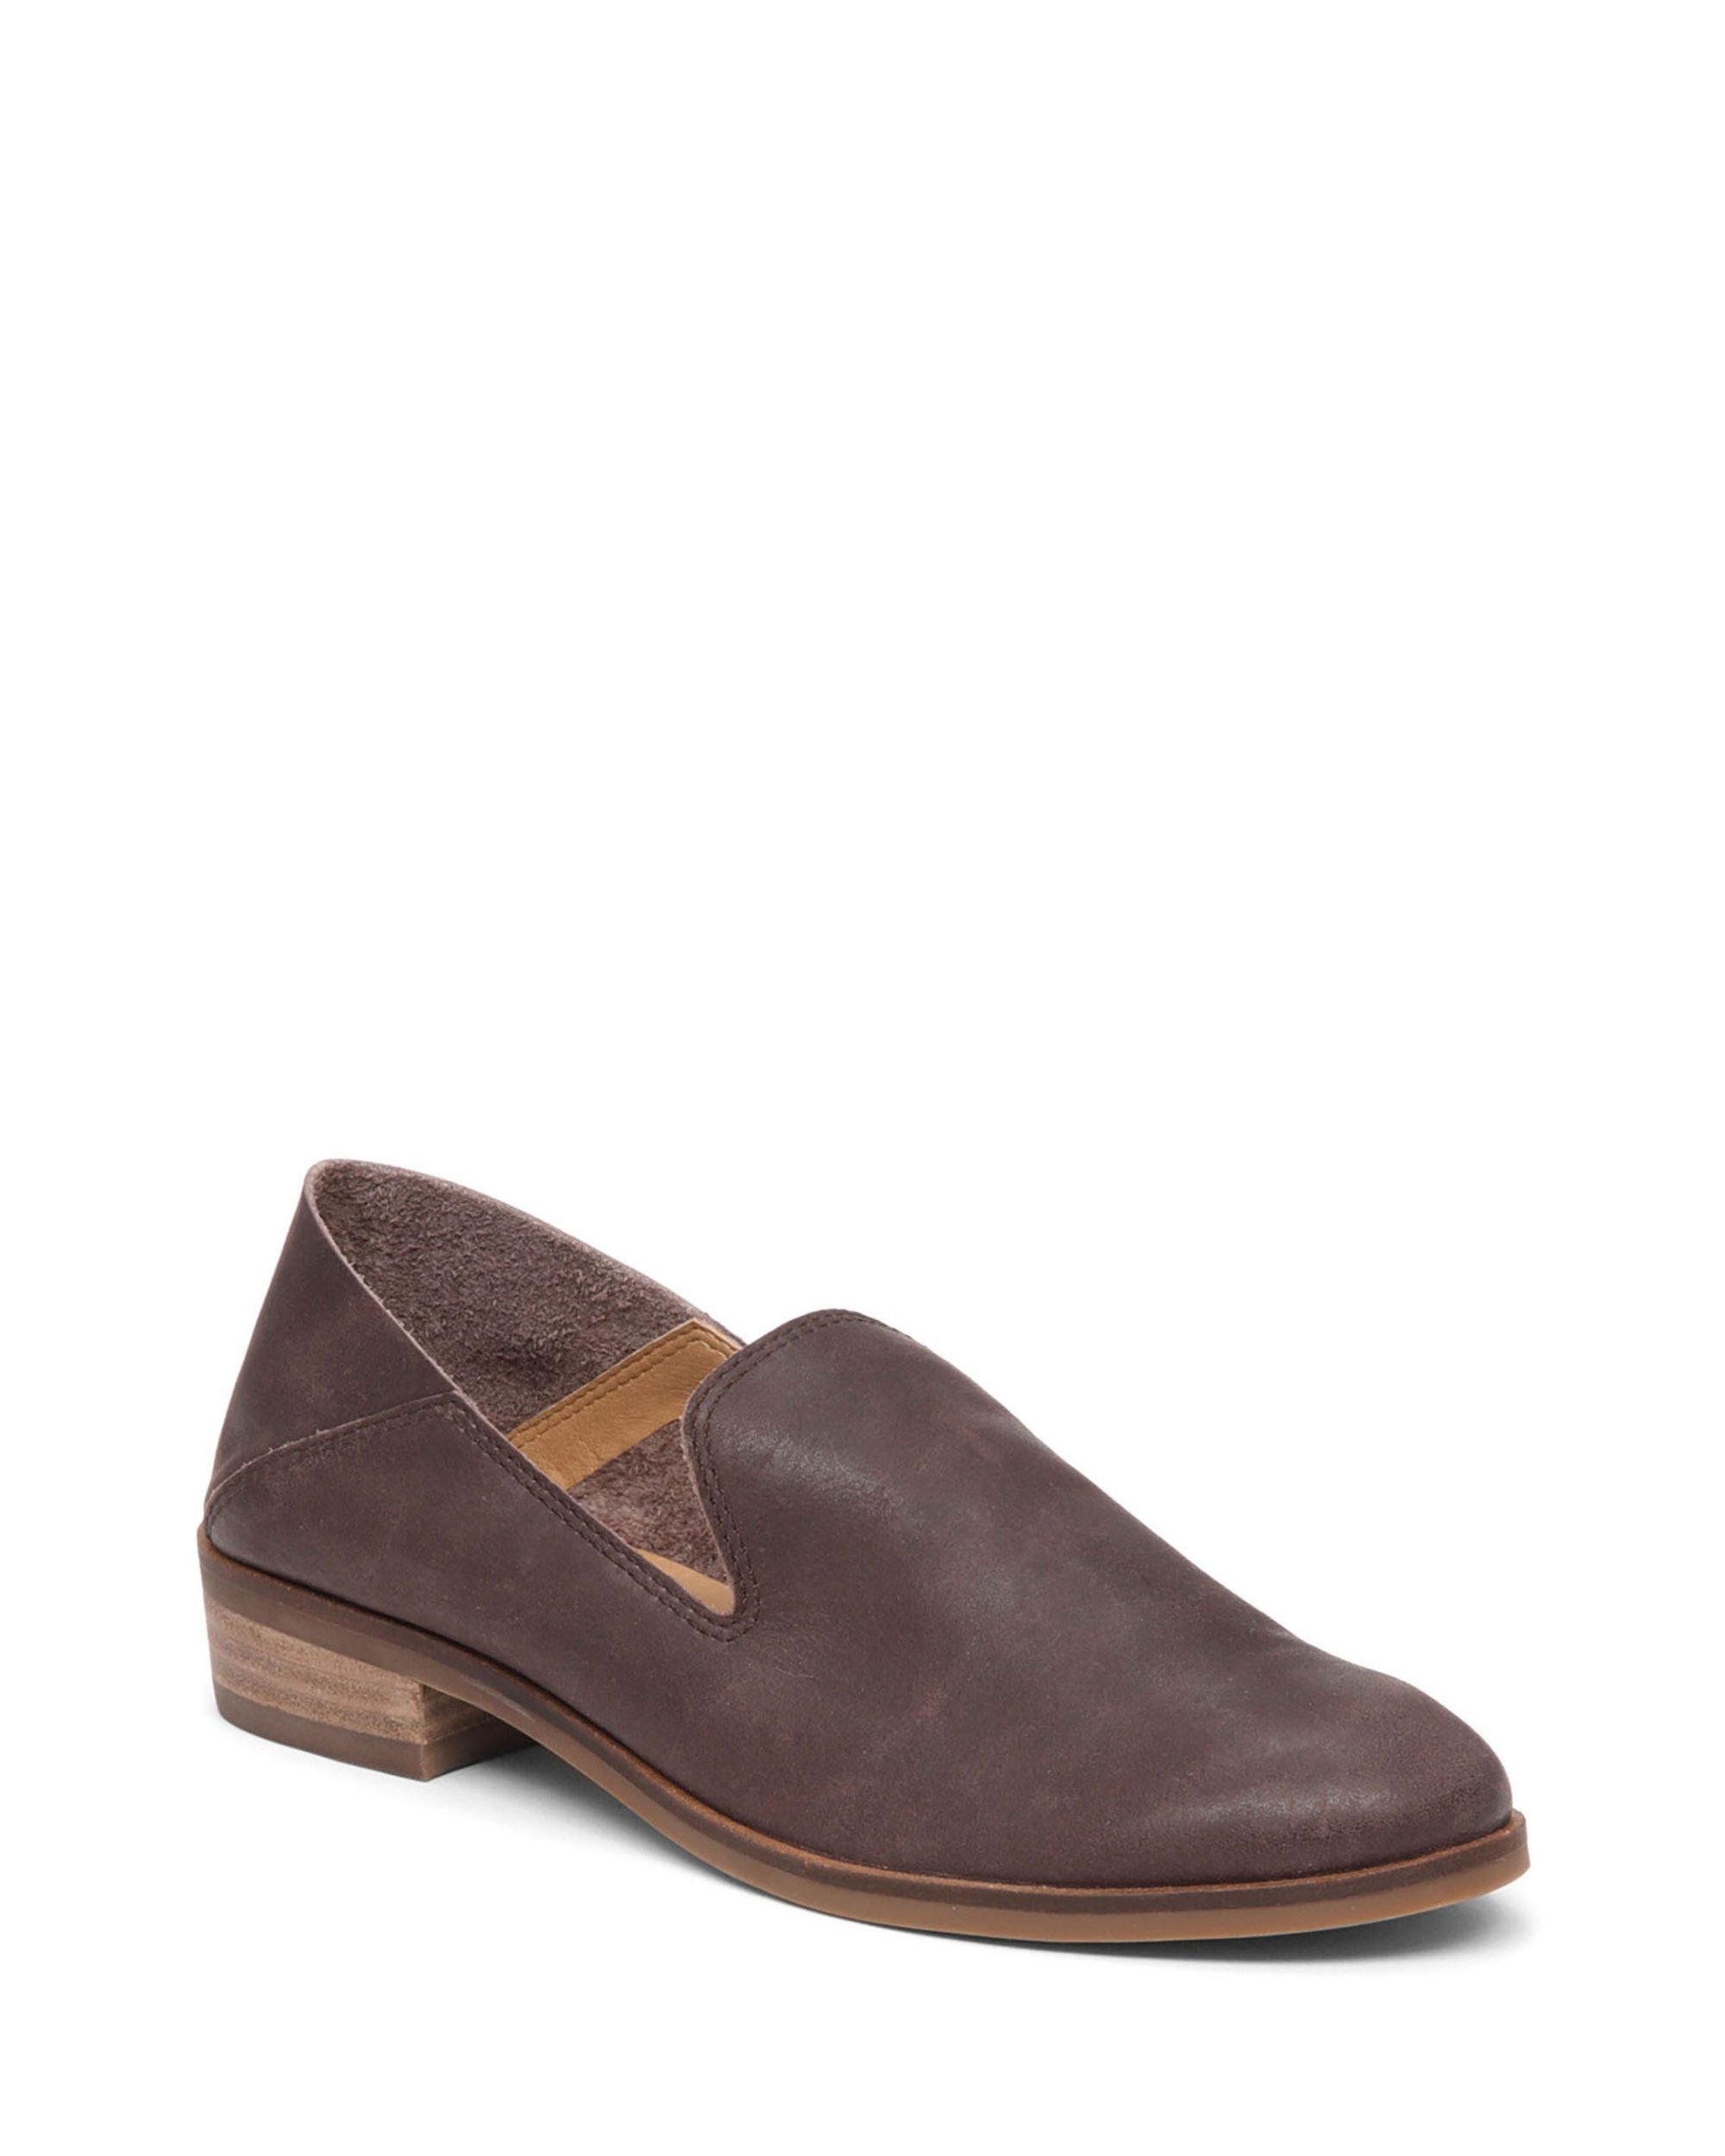 lucky brand shoes loafers